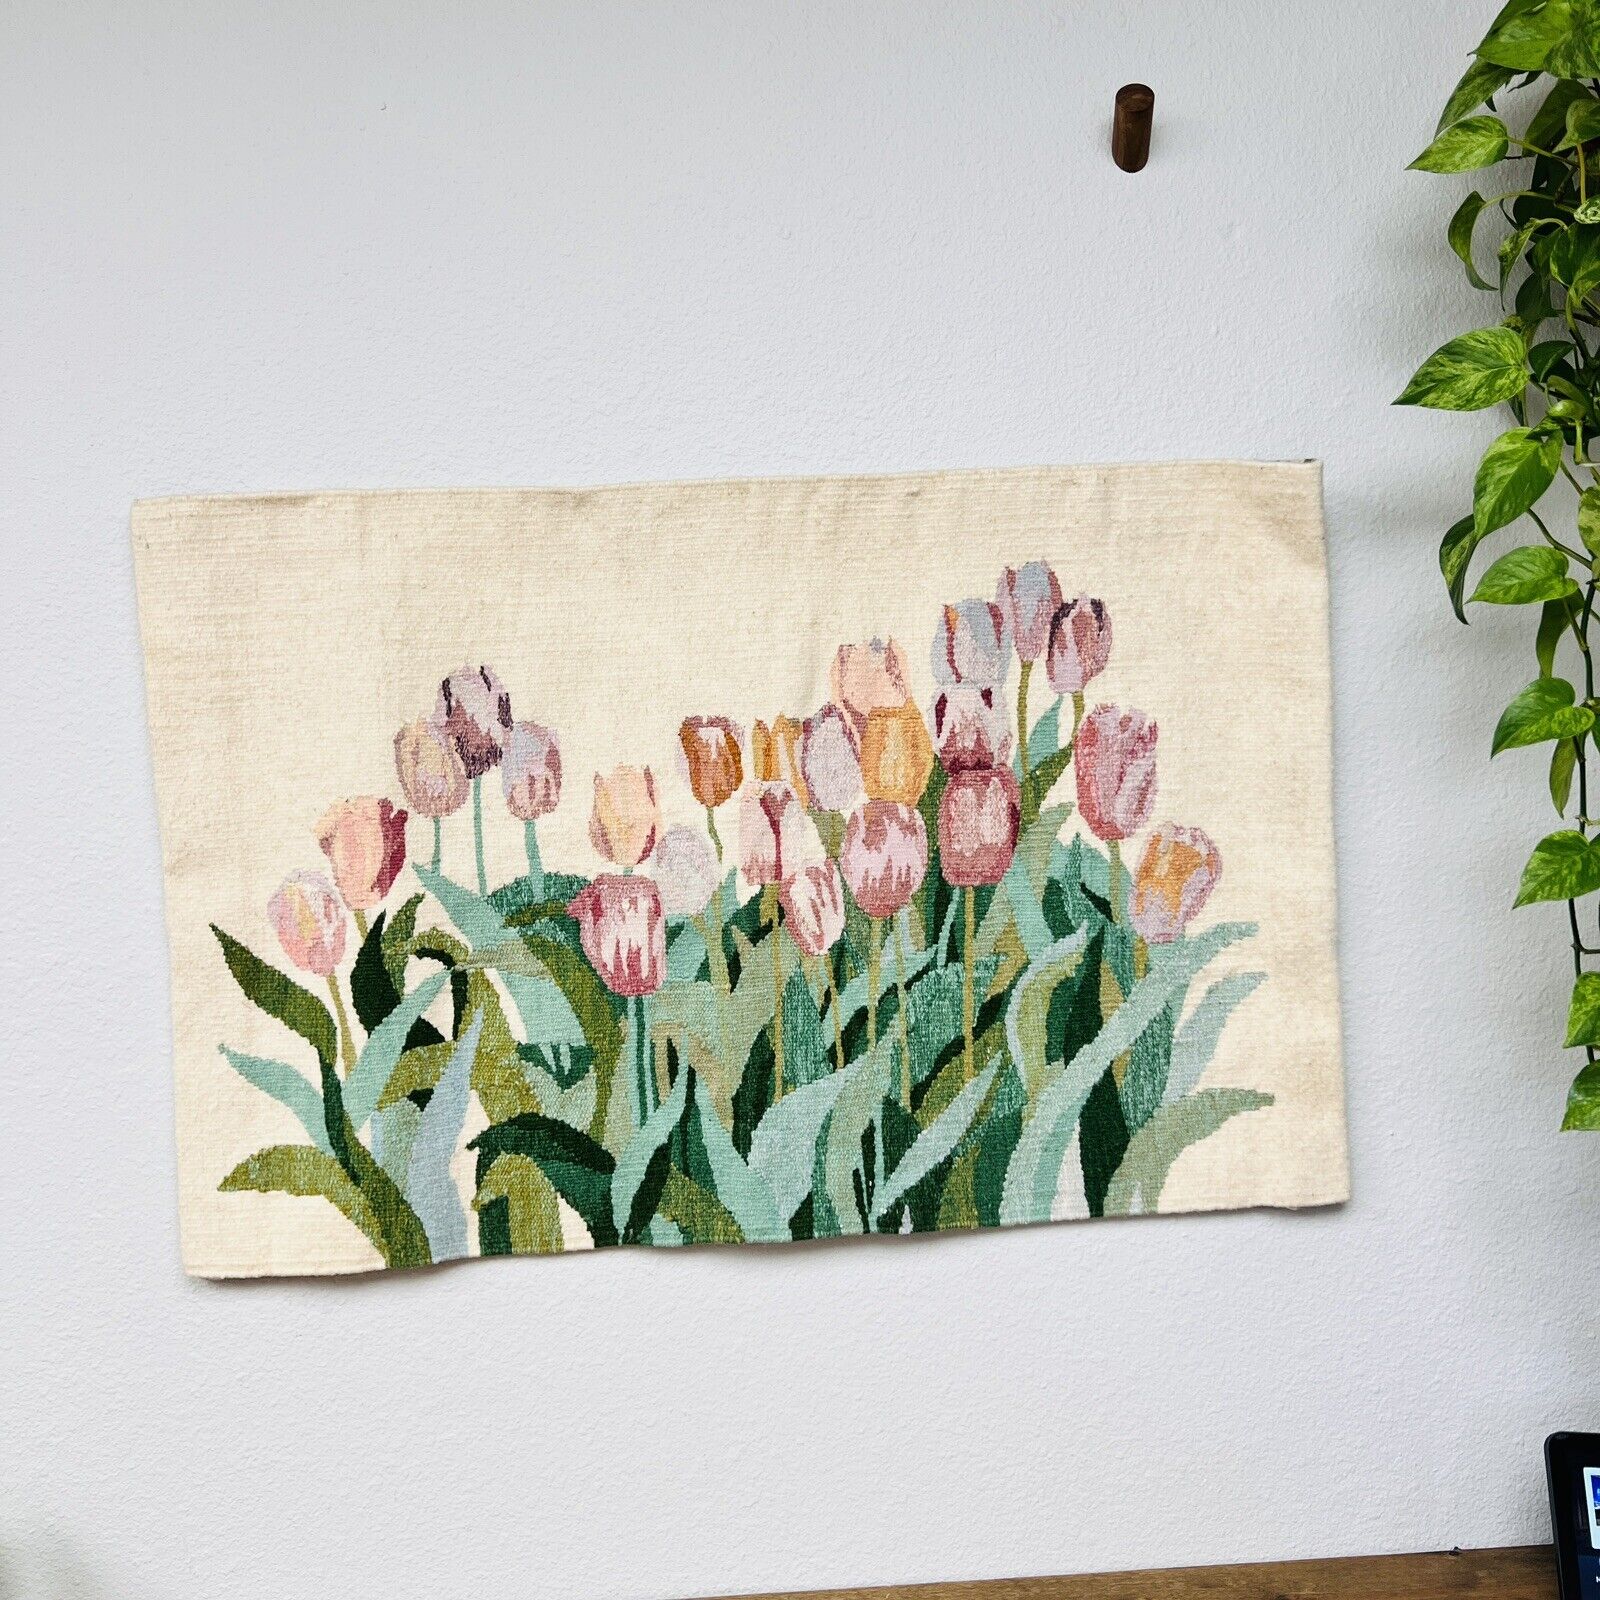 Vintage Mere Cie -Mothers Commerce Company Woven Tapestry Wool 37" x 24" Tulips